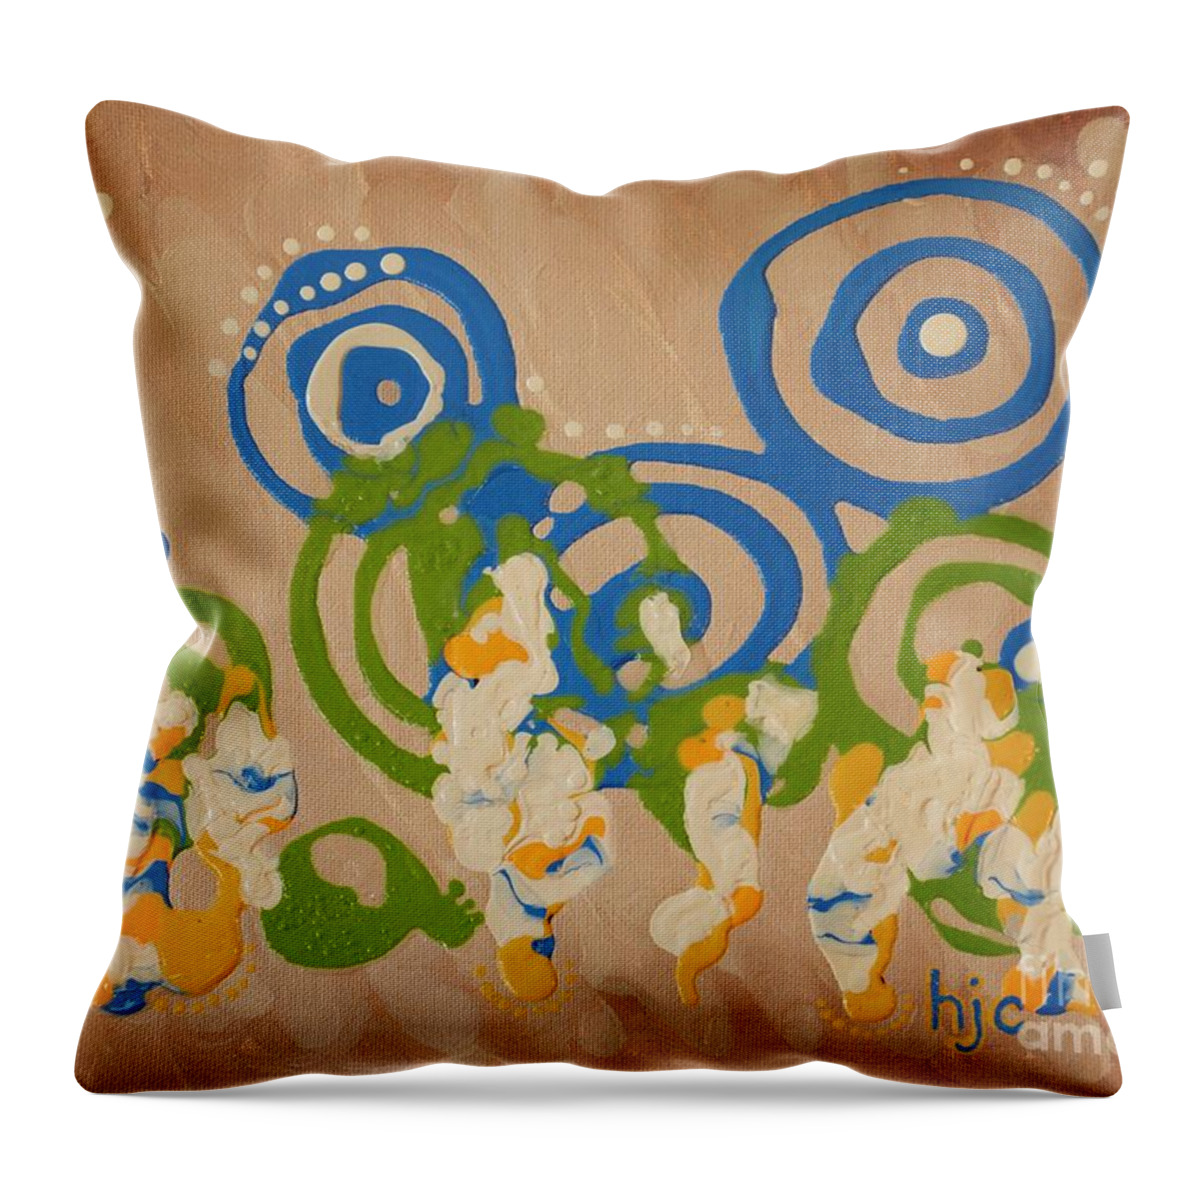 Urantia Throw Pillow featuring the painting I Read The Urantia Book by Holly Carmichael